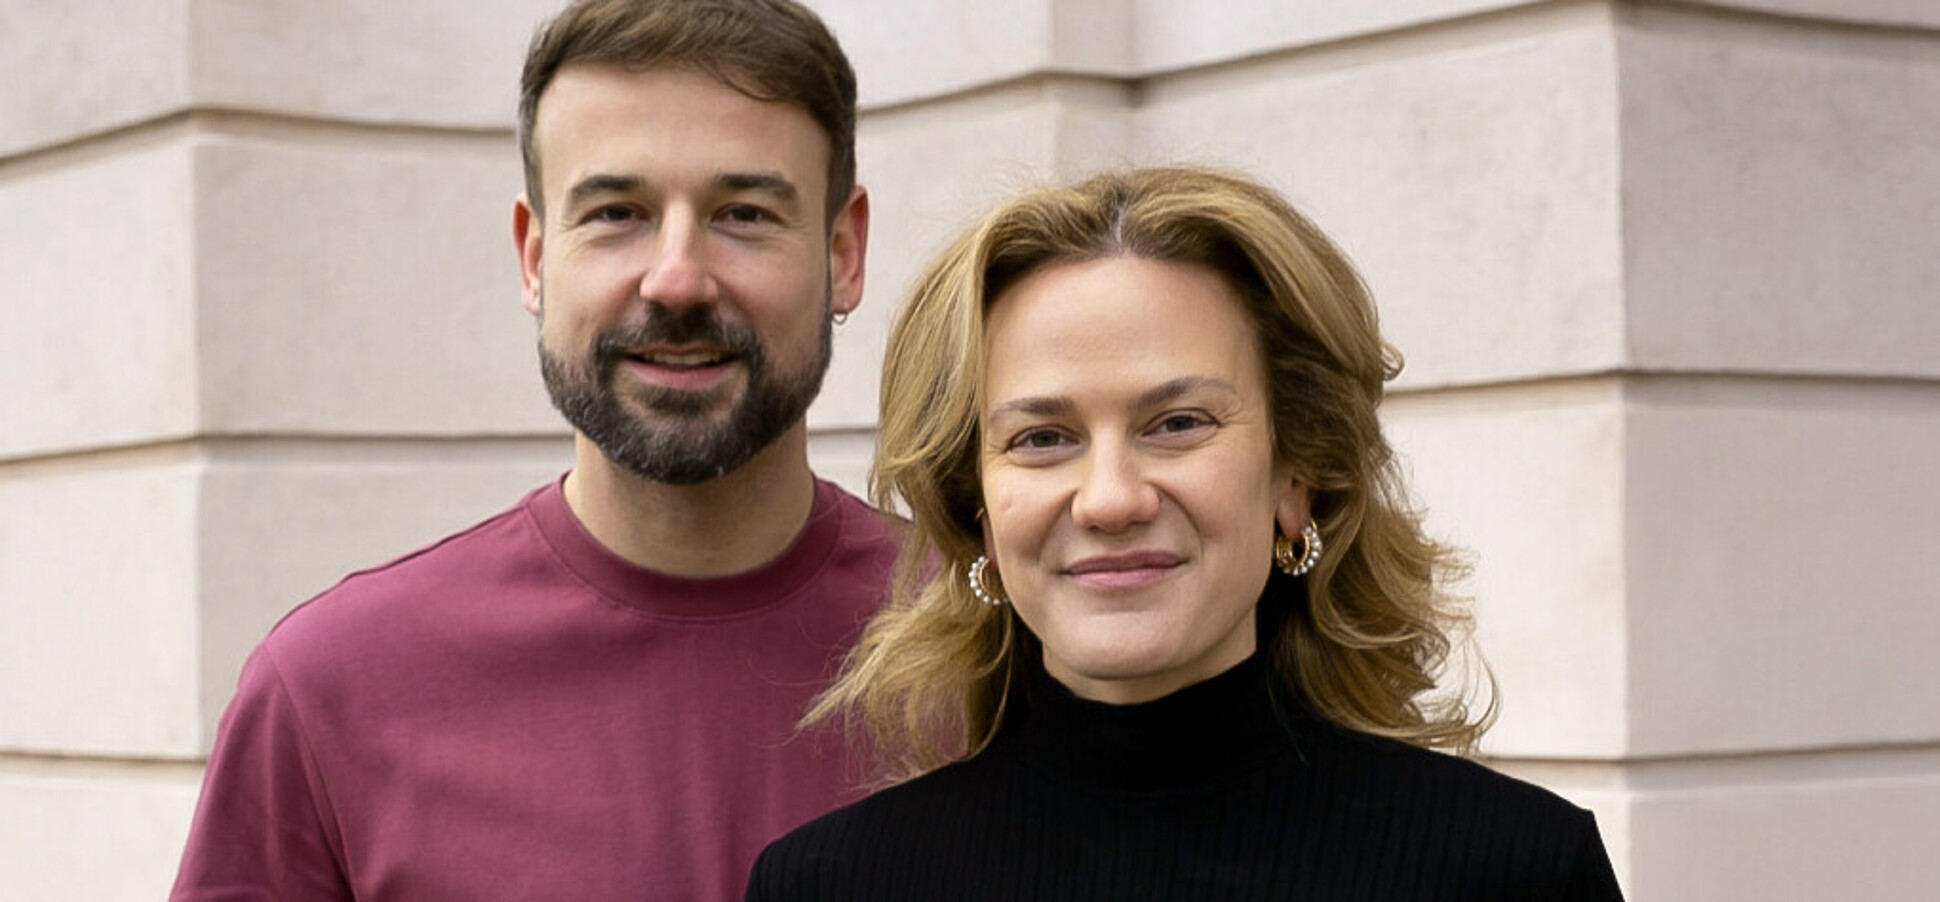 Frieda Health founders Valentina Ullrich and Dr. Kai Schulze Wundling